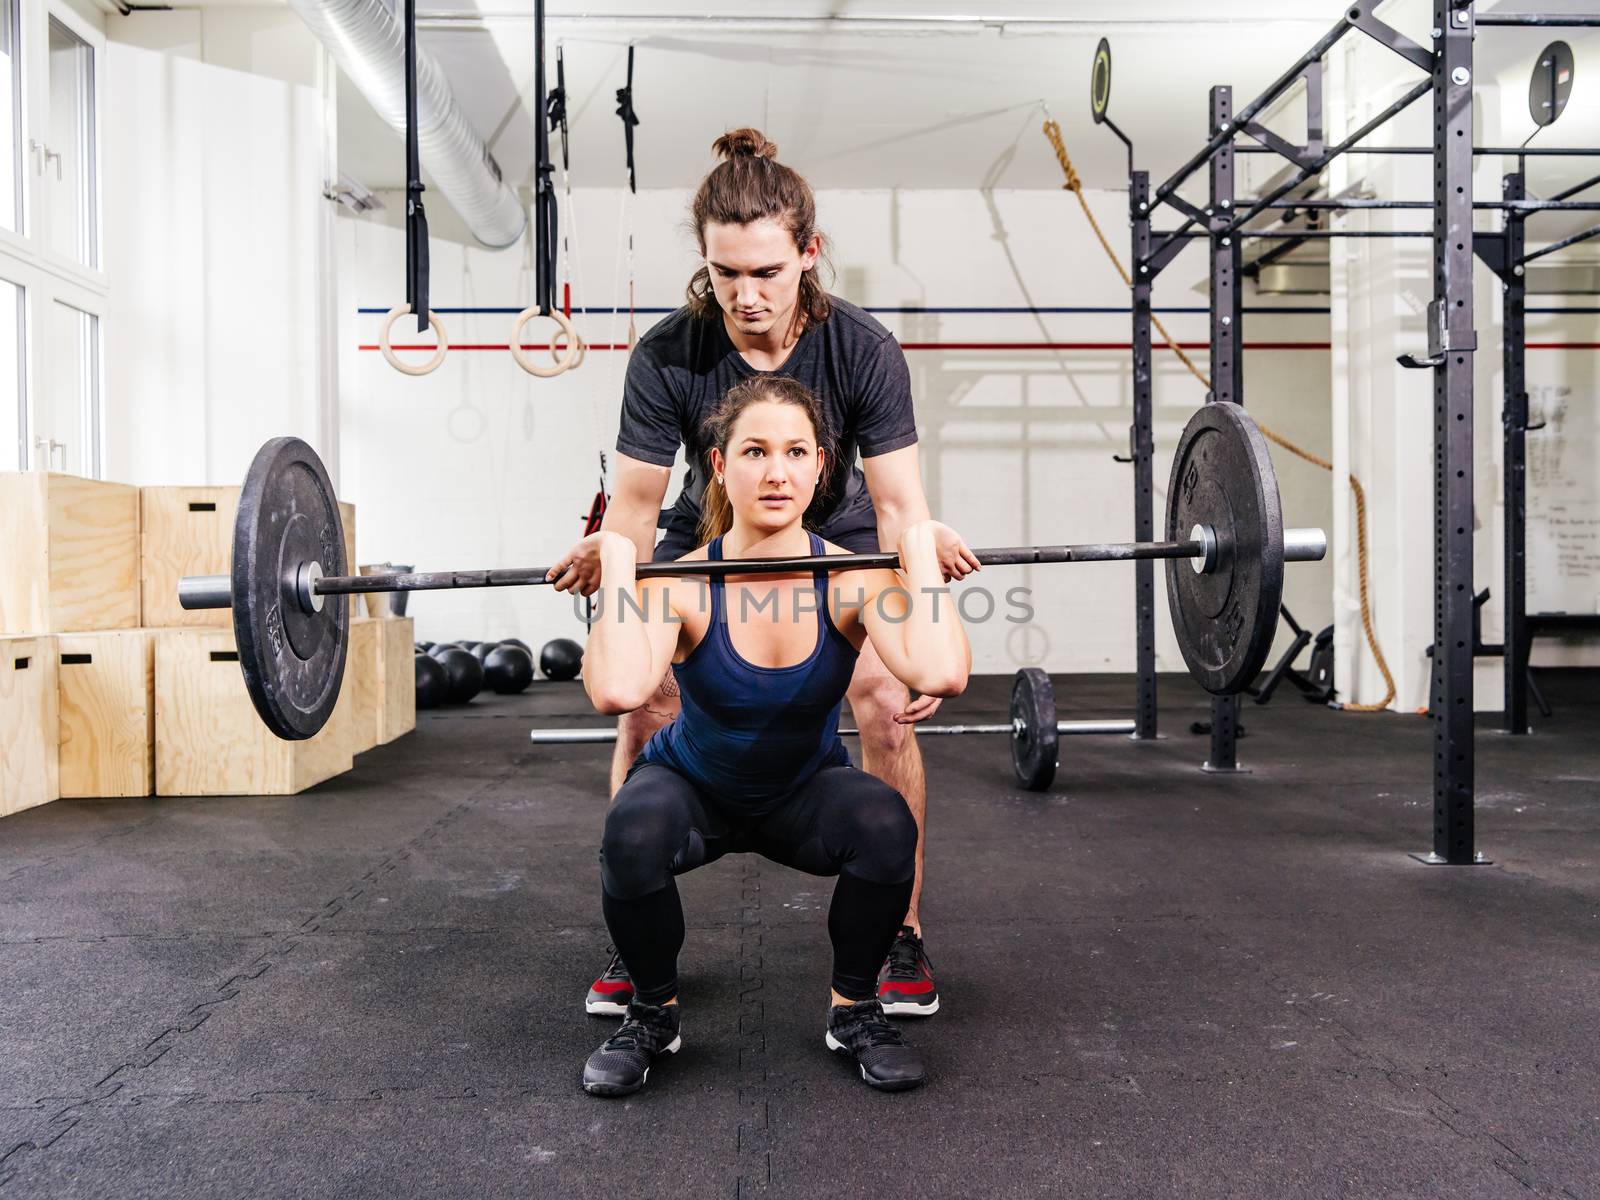 Photo of a young woman at a crossfit gym doing squats while her instructor watches from behind.